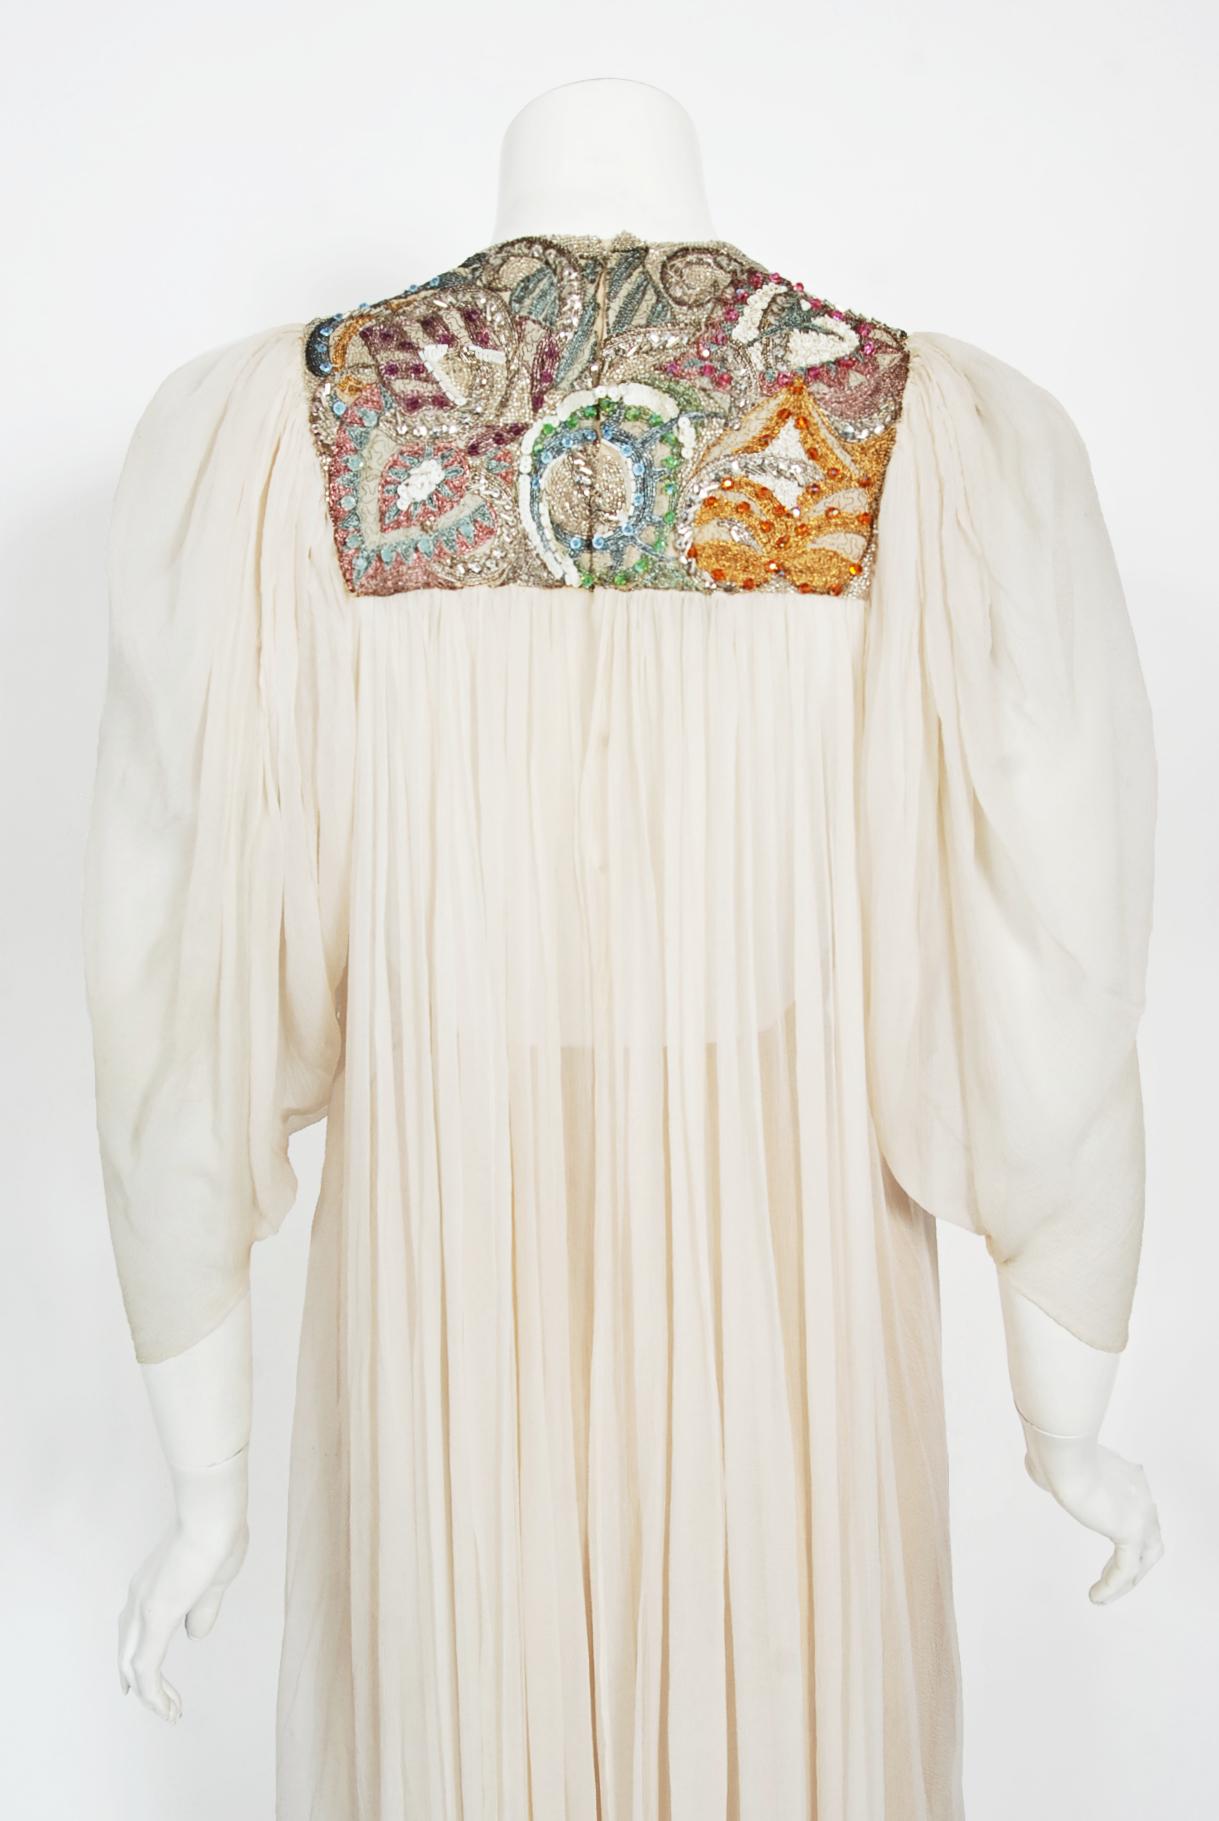 1970's Madame Grès Haute Couture Beaded Embroidered Ivory Sheer Silk Bridal Gown For Sale 8